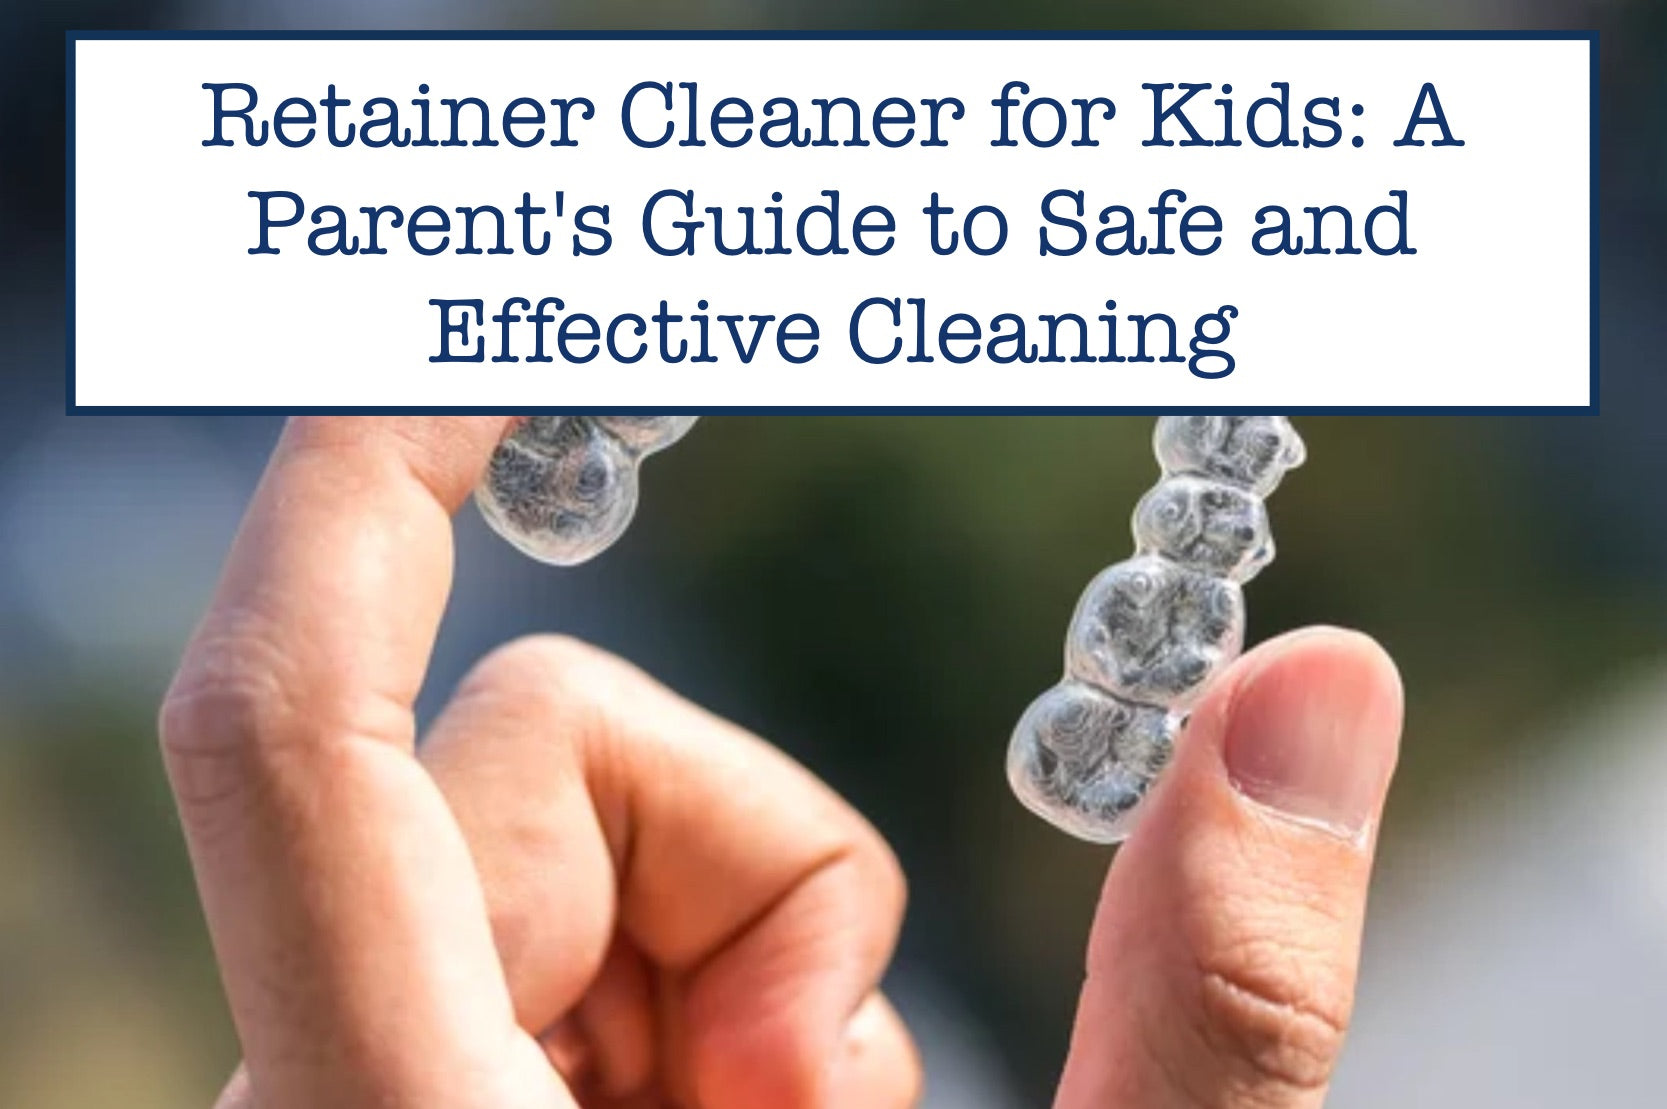 Retainer Cleaner for Kids: A Parent's Guide to Safe and Effective Cleaning